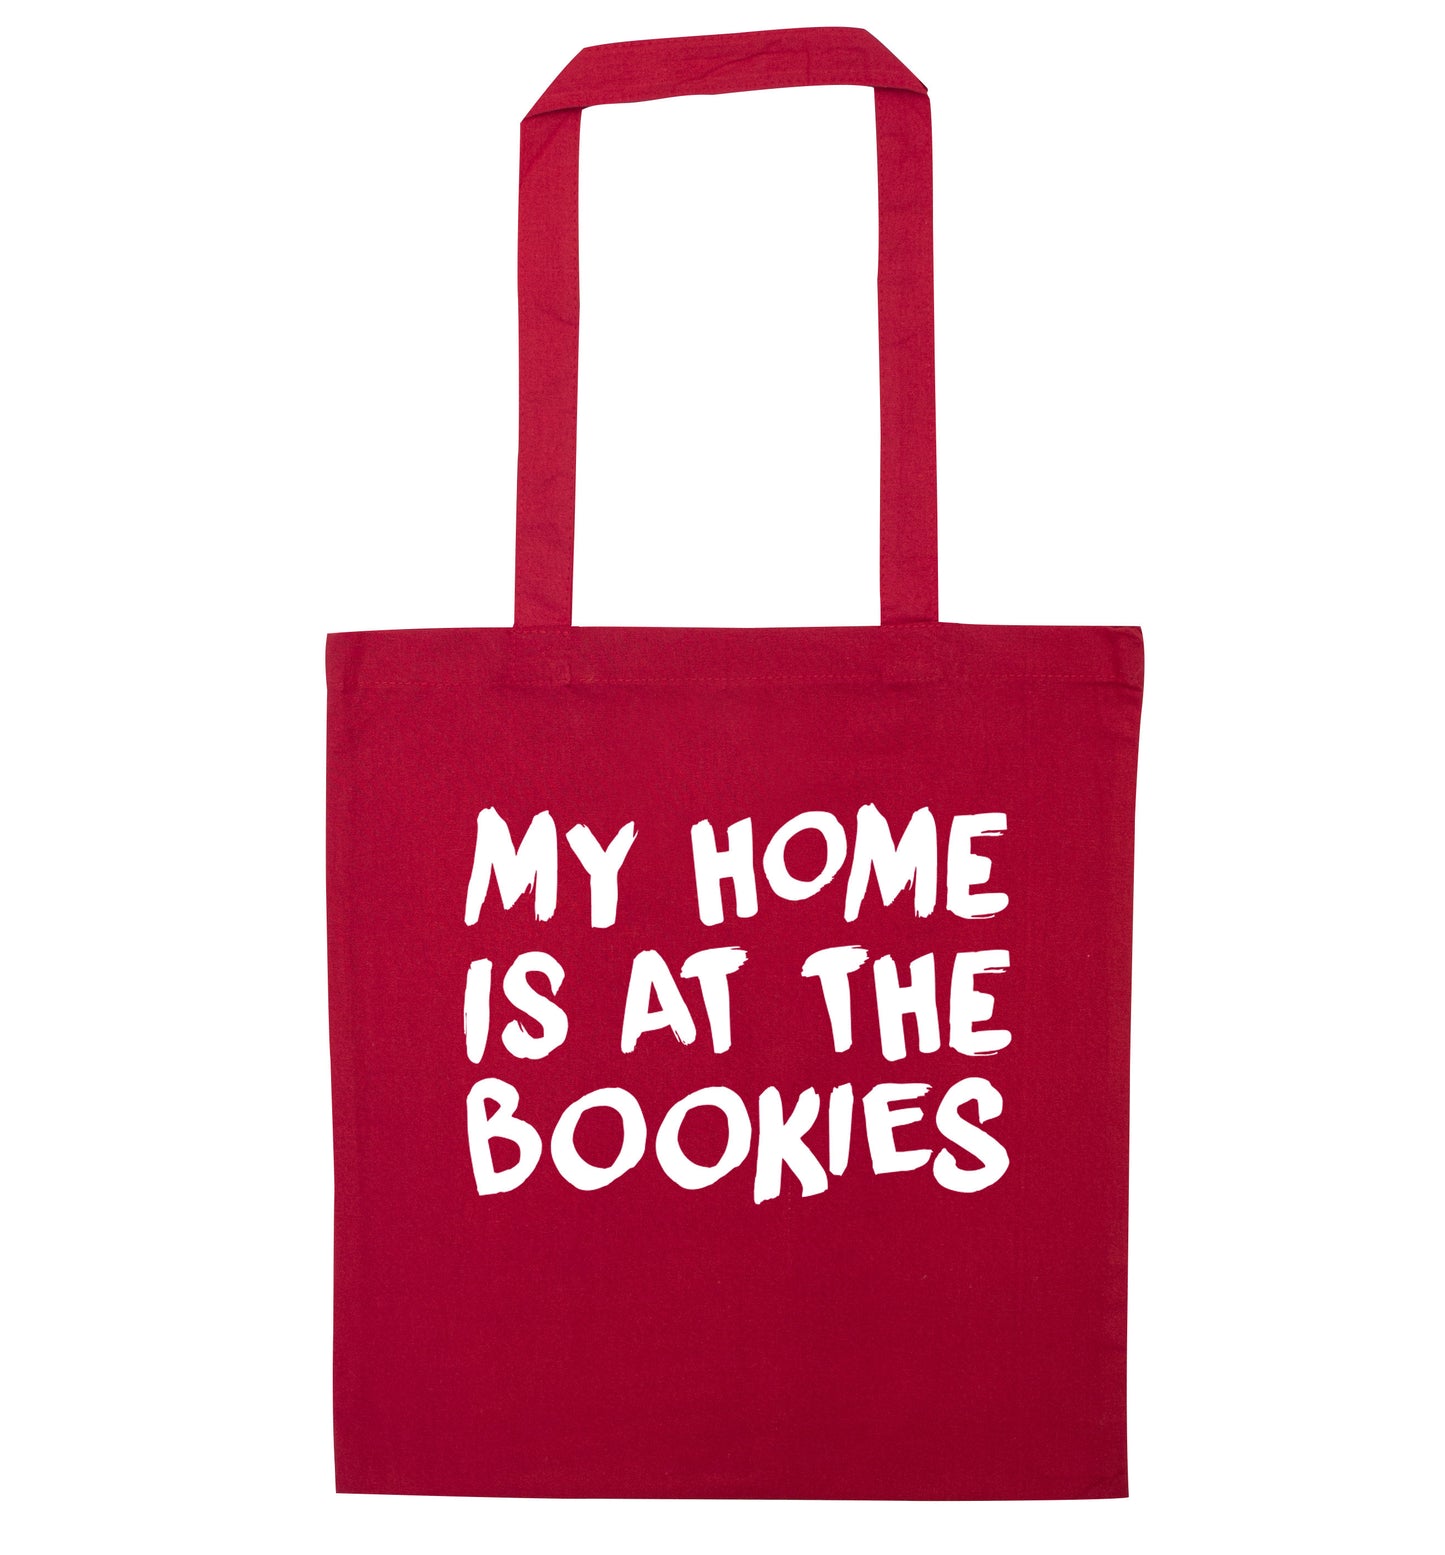 My home is at the bookies red tote bag